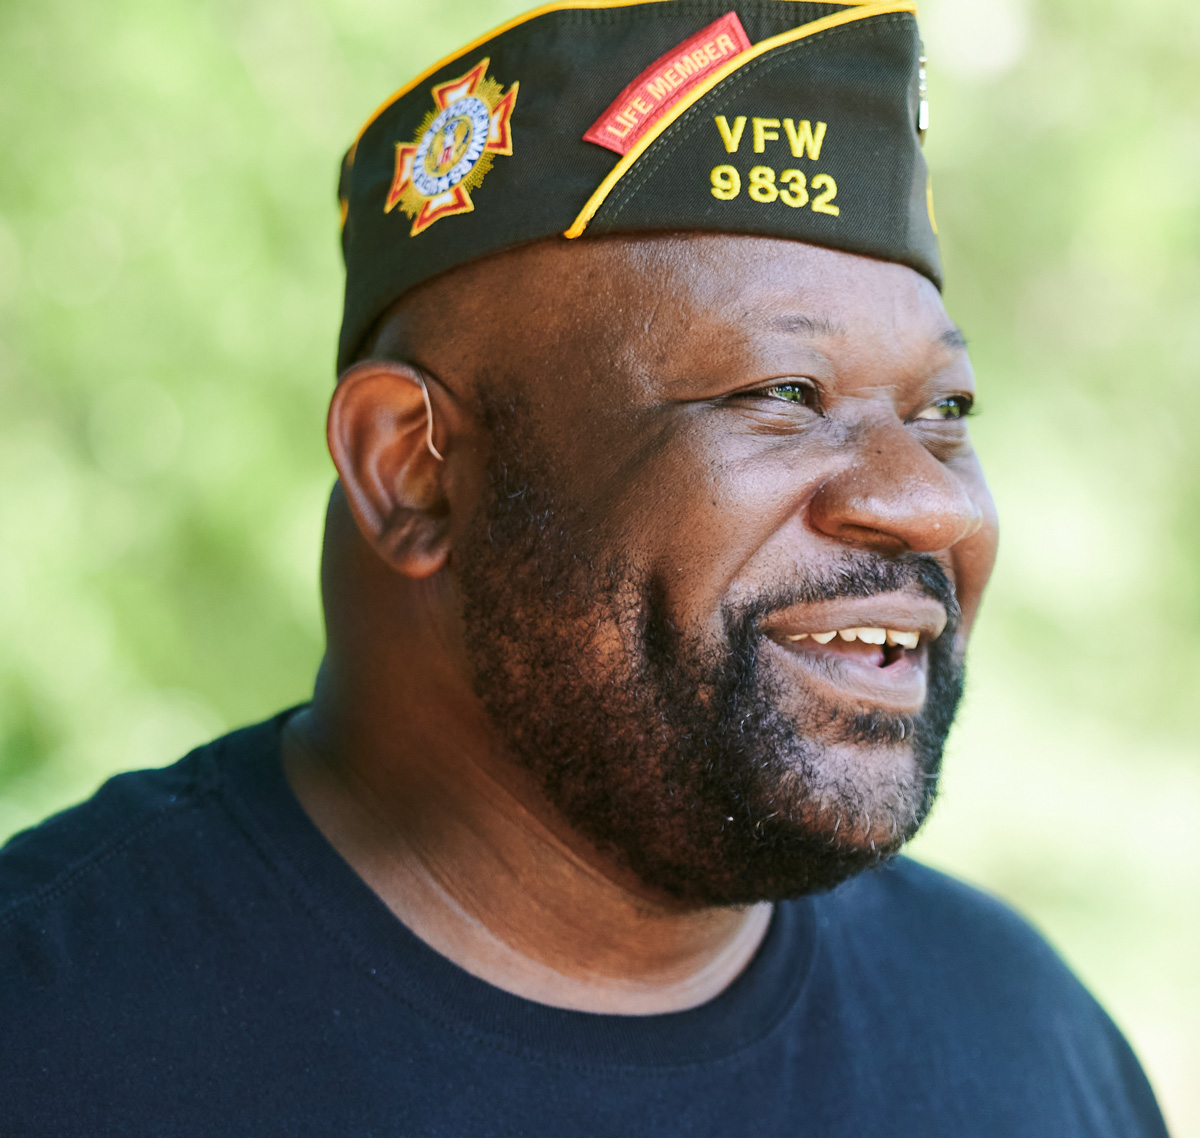 A man wearing a VFW 9832 vet hat smiles to the right